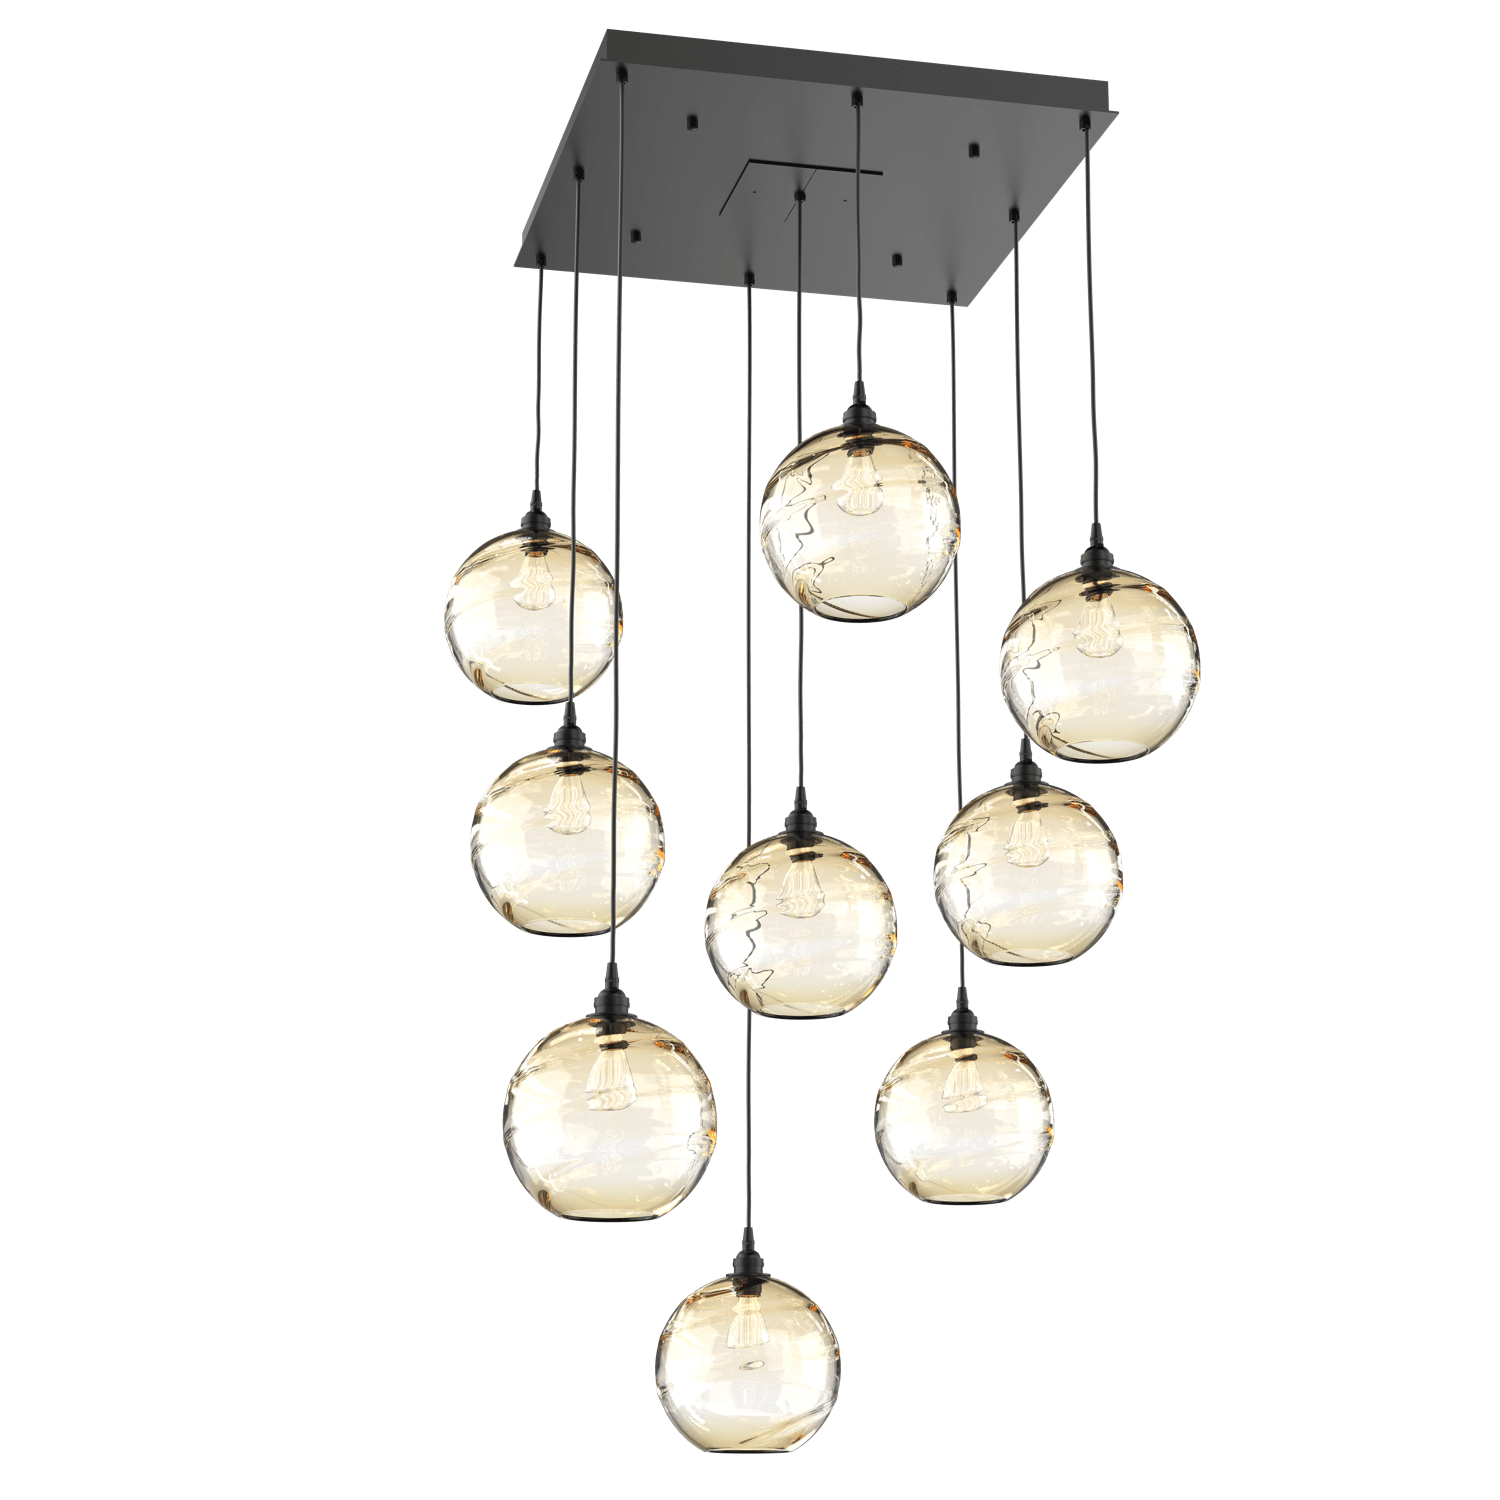 CHB0047-09-MB-OA-Hammerton-Studio-Optic-Blown-Glass-Terra-9-light-square-pendant-chandelier-with-matte-black-finish-and-optic-amber-blown-glass-shades-and-incandescent-lamping